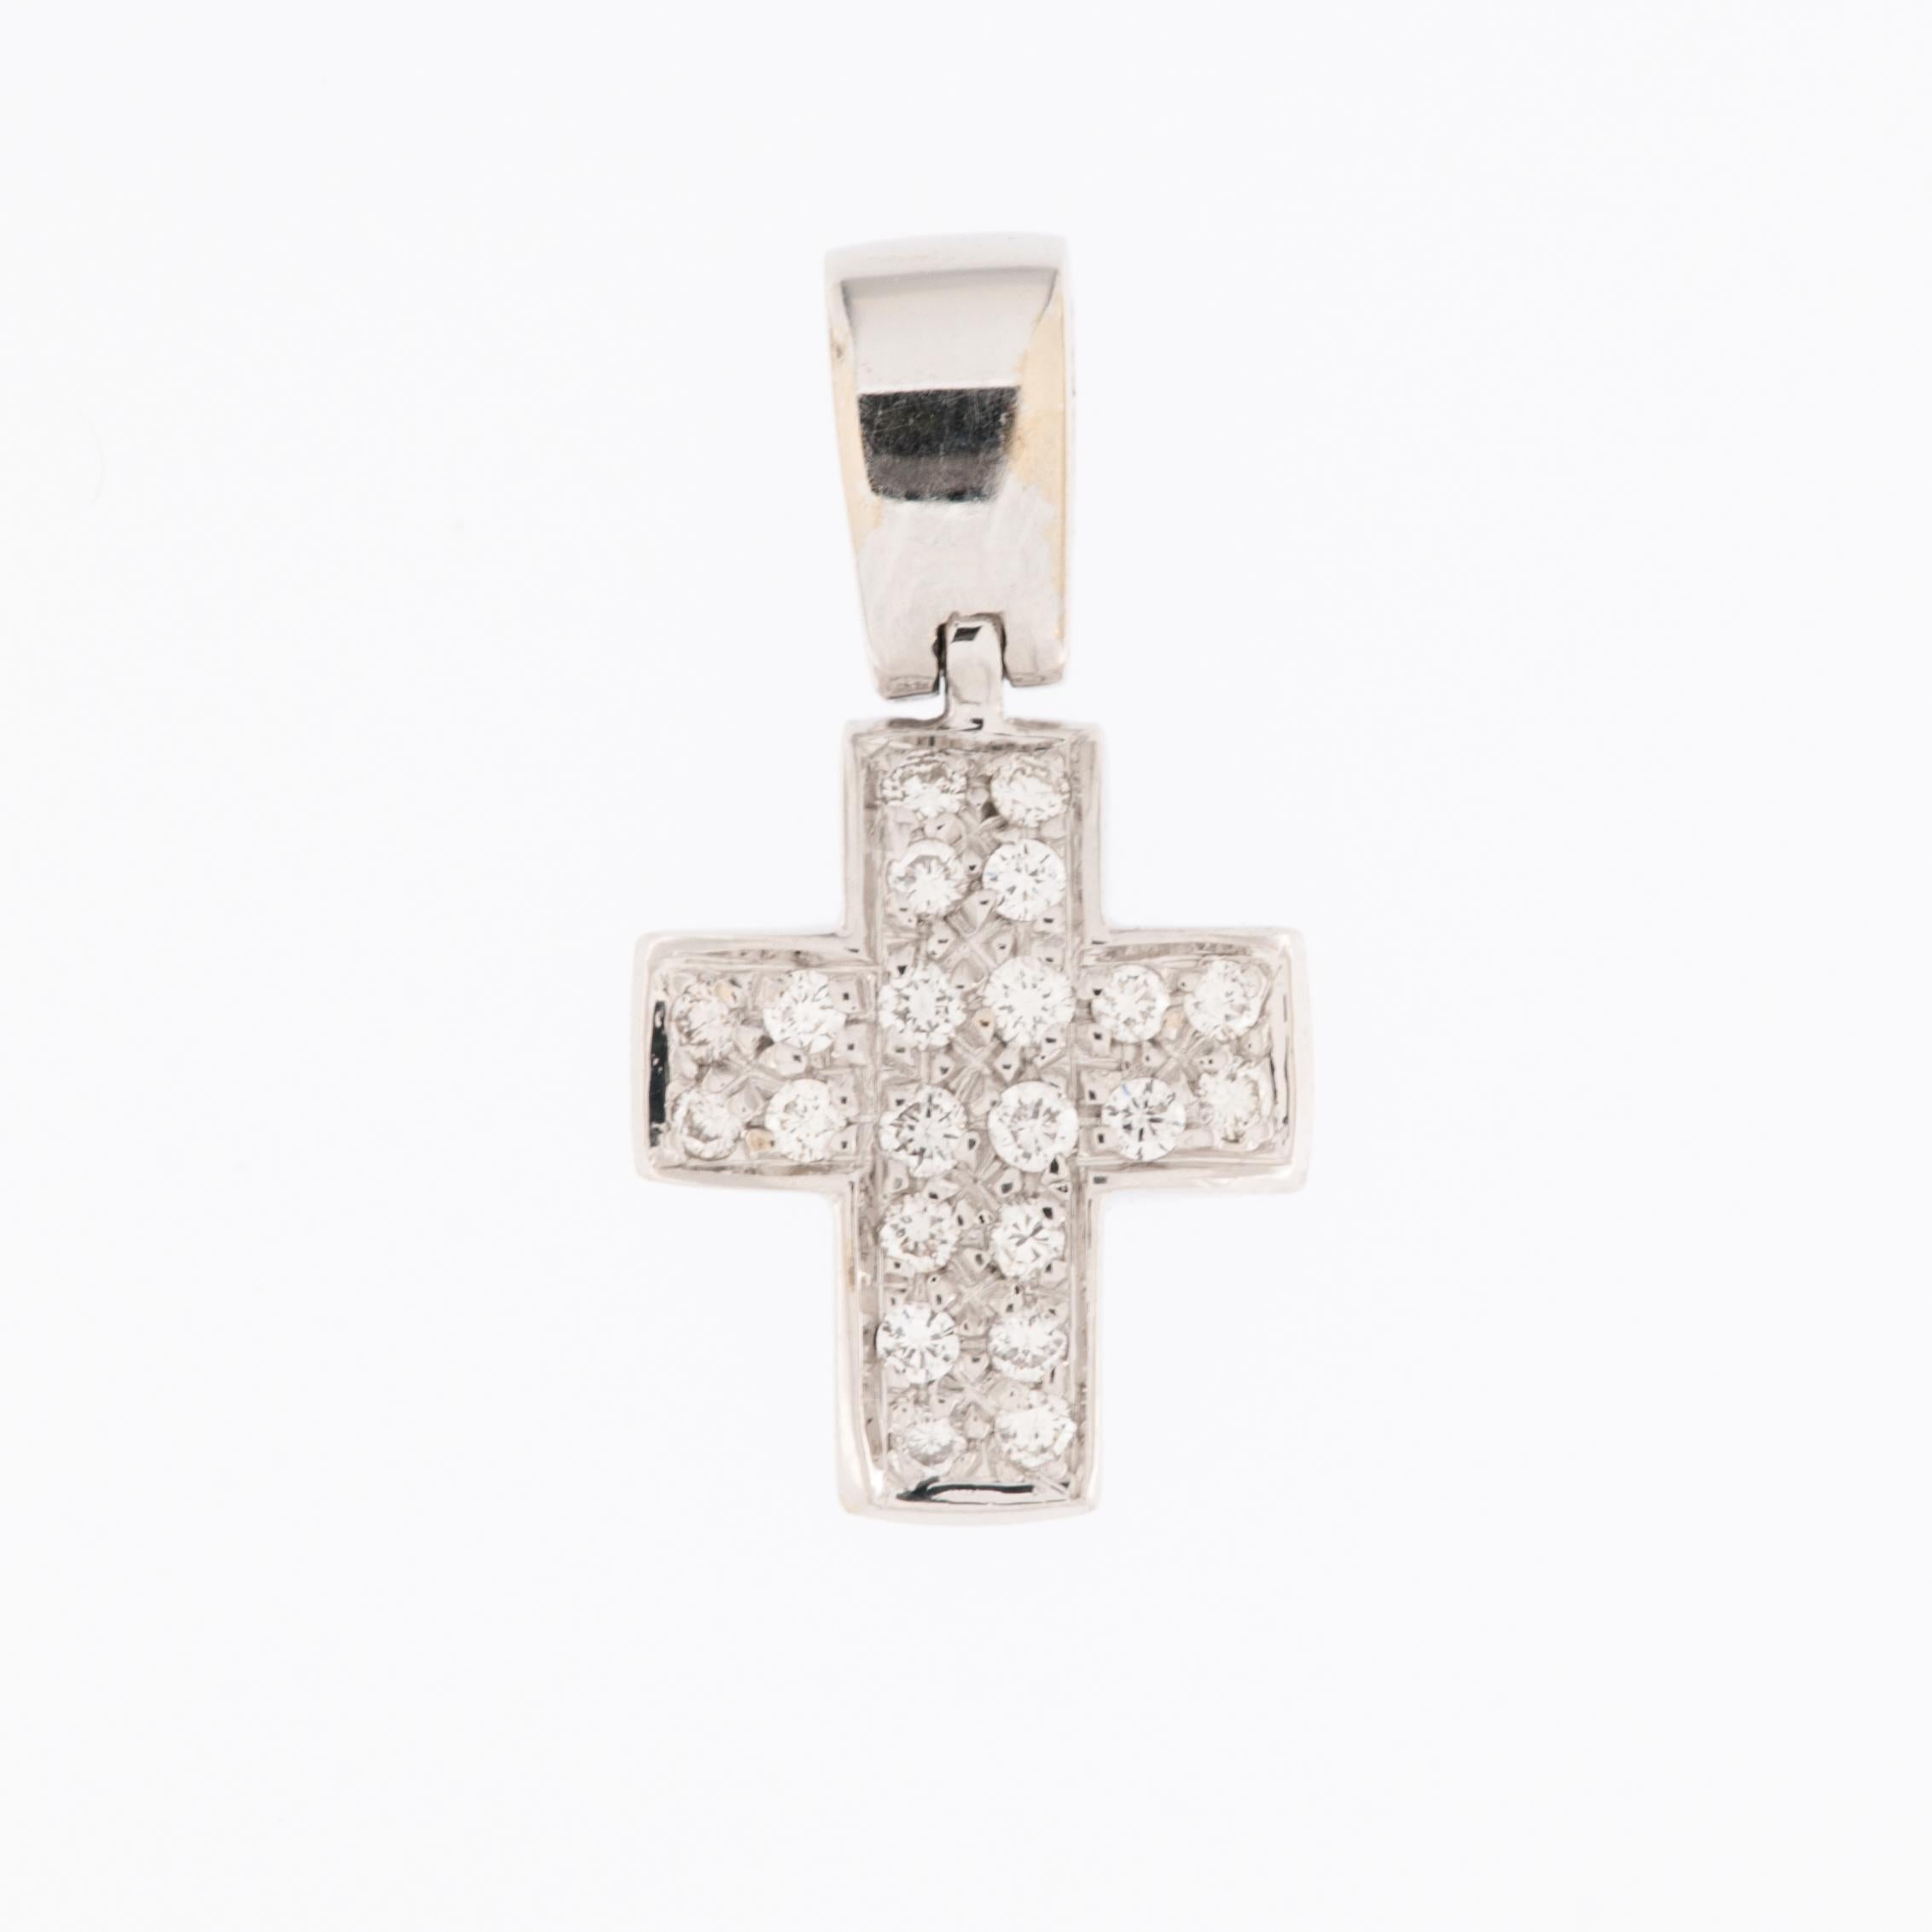 The Italian Modern 18kt White Gold Cross with Diamonds is a marvelous piece of jewelry that exudes elegance and timeless charm. 

This cross pendant is crafted from 18-karat white gold, which is known for its brightness. The use of high-quality gold